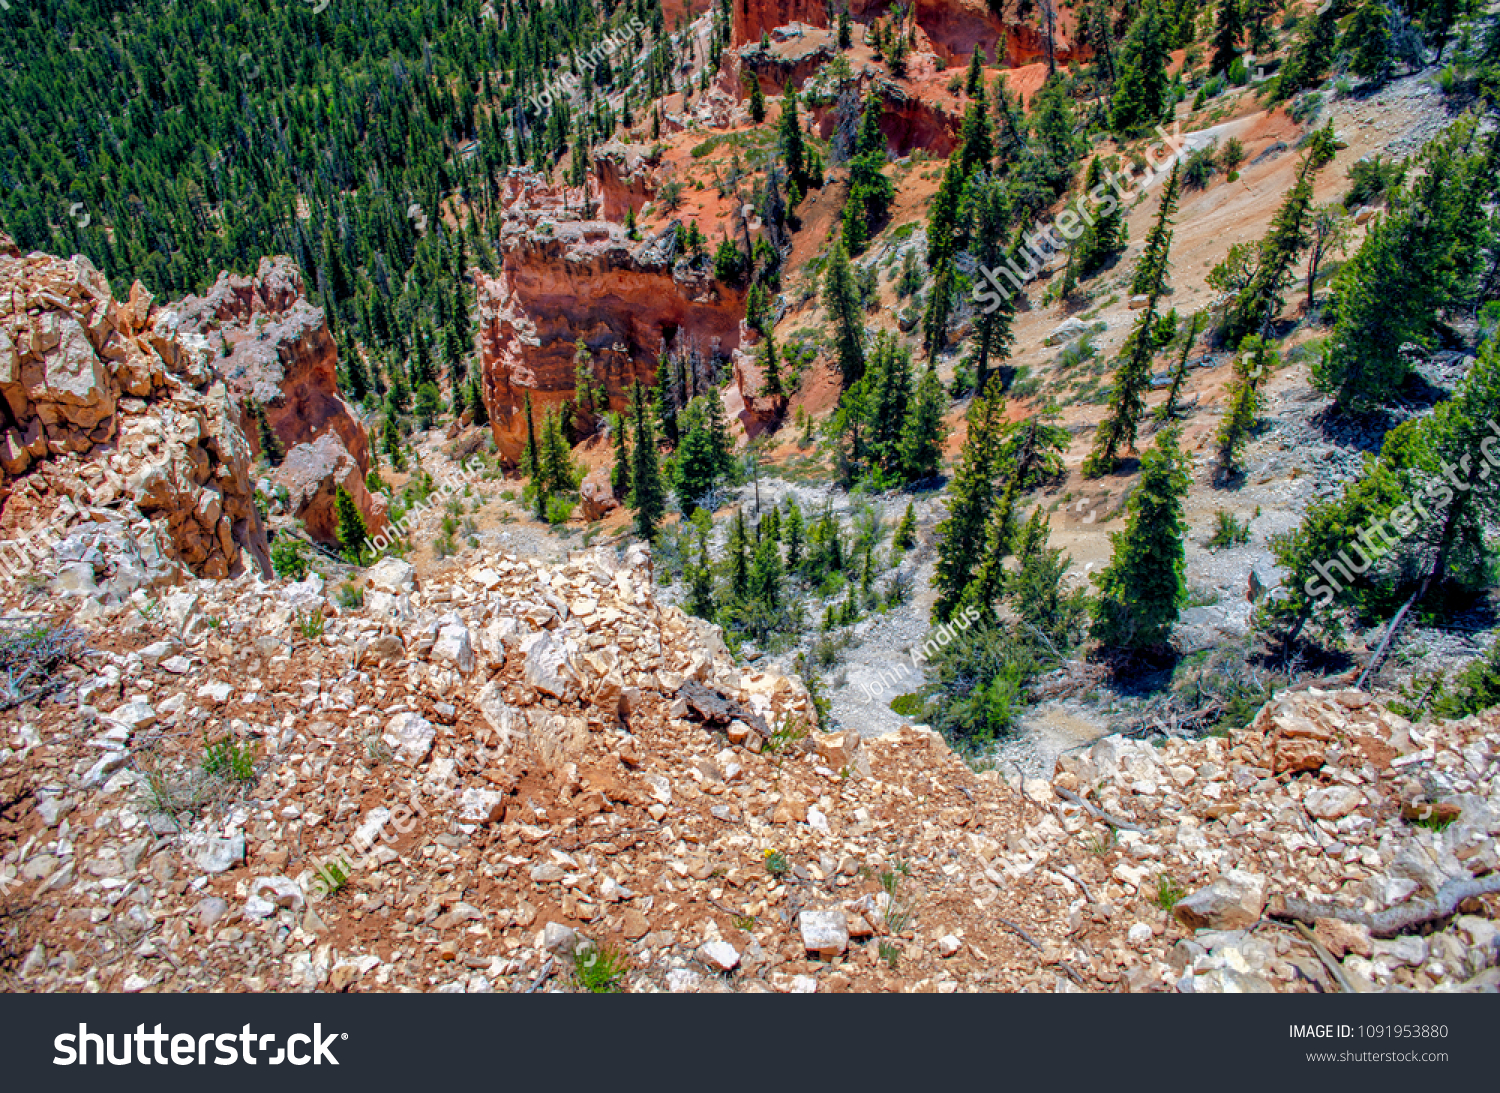 Looking over a cliff down into a valley with green trees and red sandstone formations. #1091953880